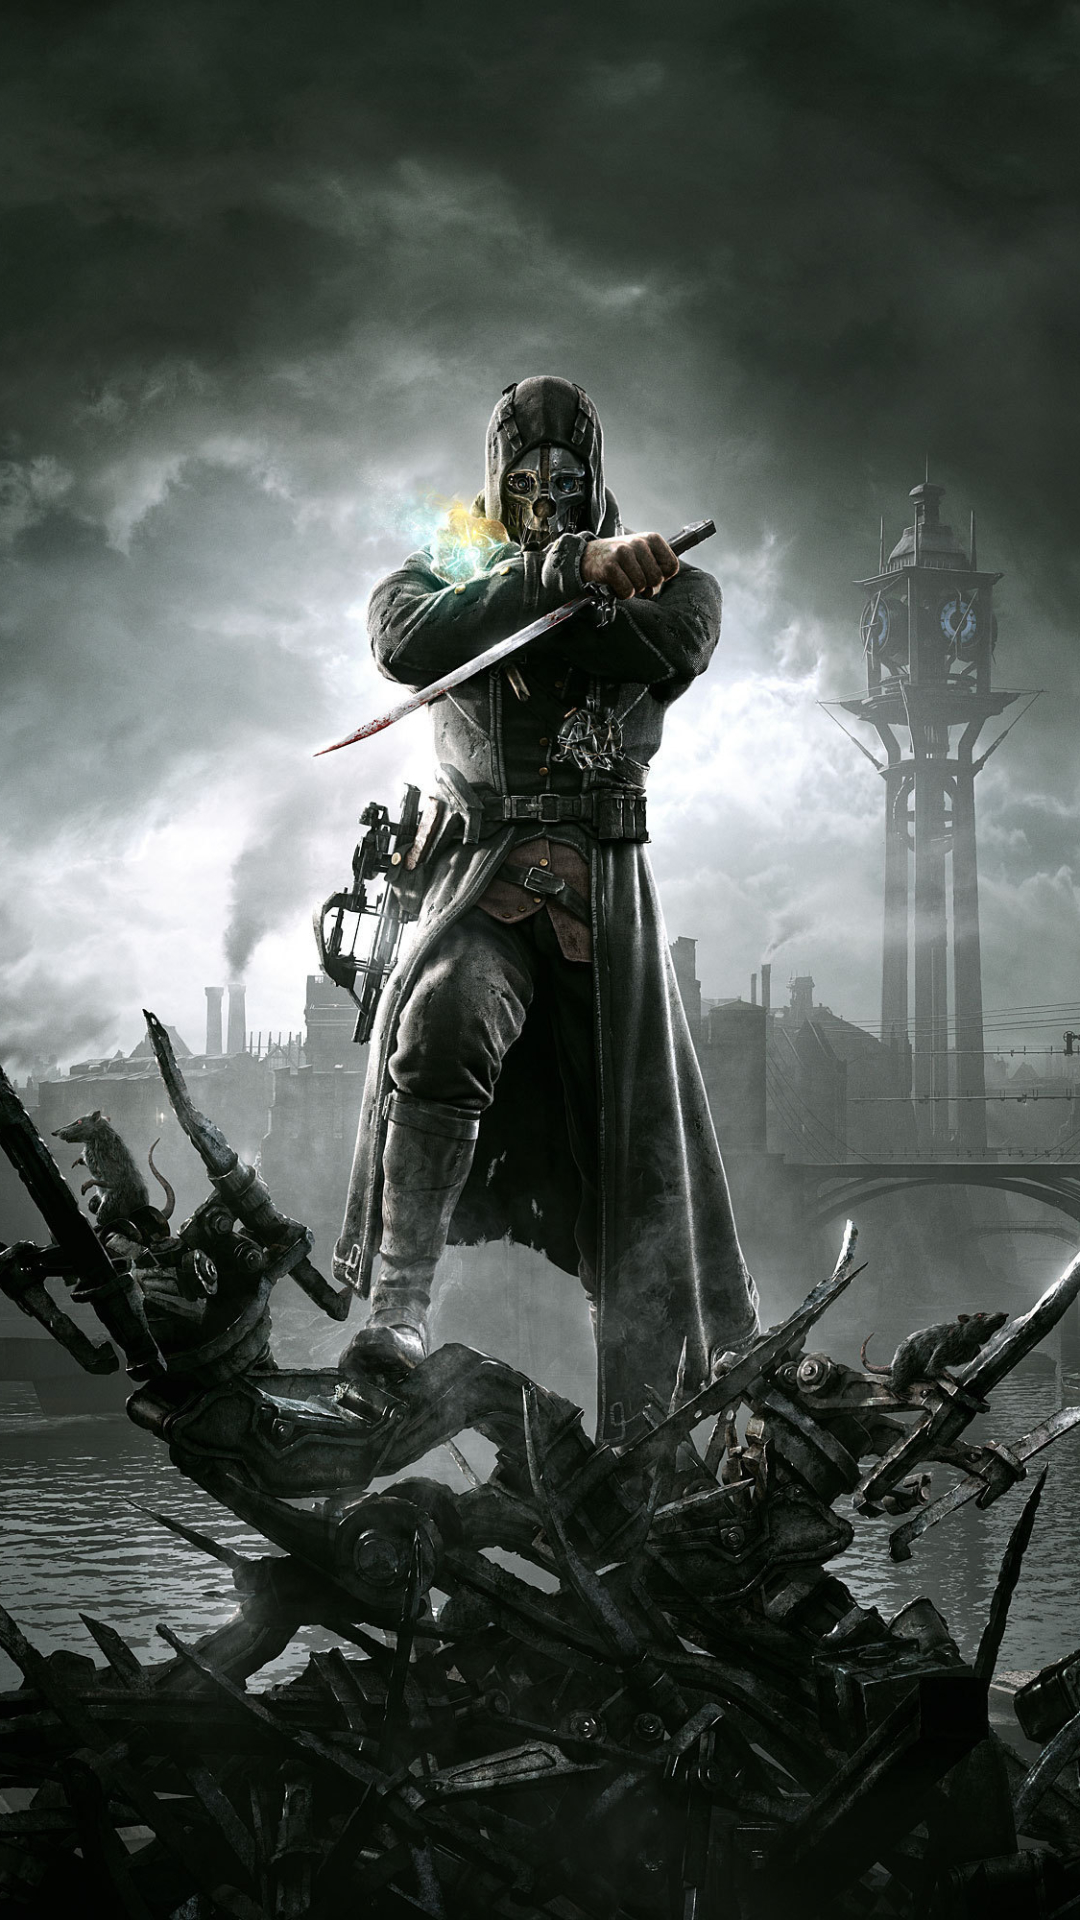 dishonored, video game, assassin, corvo attano, post apocalyptic, warrior phone background